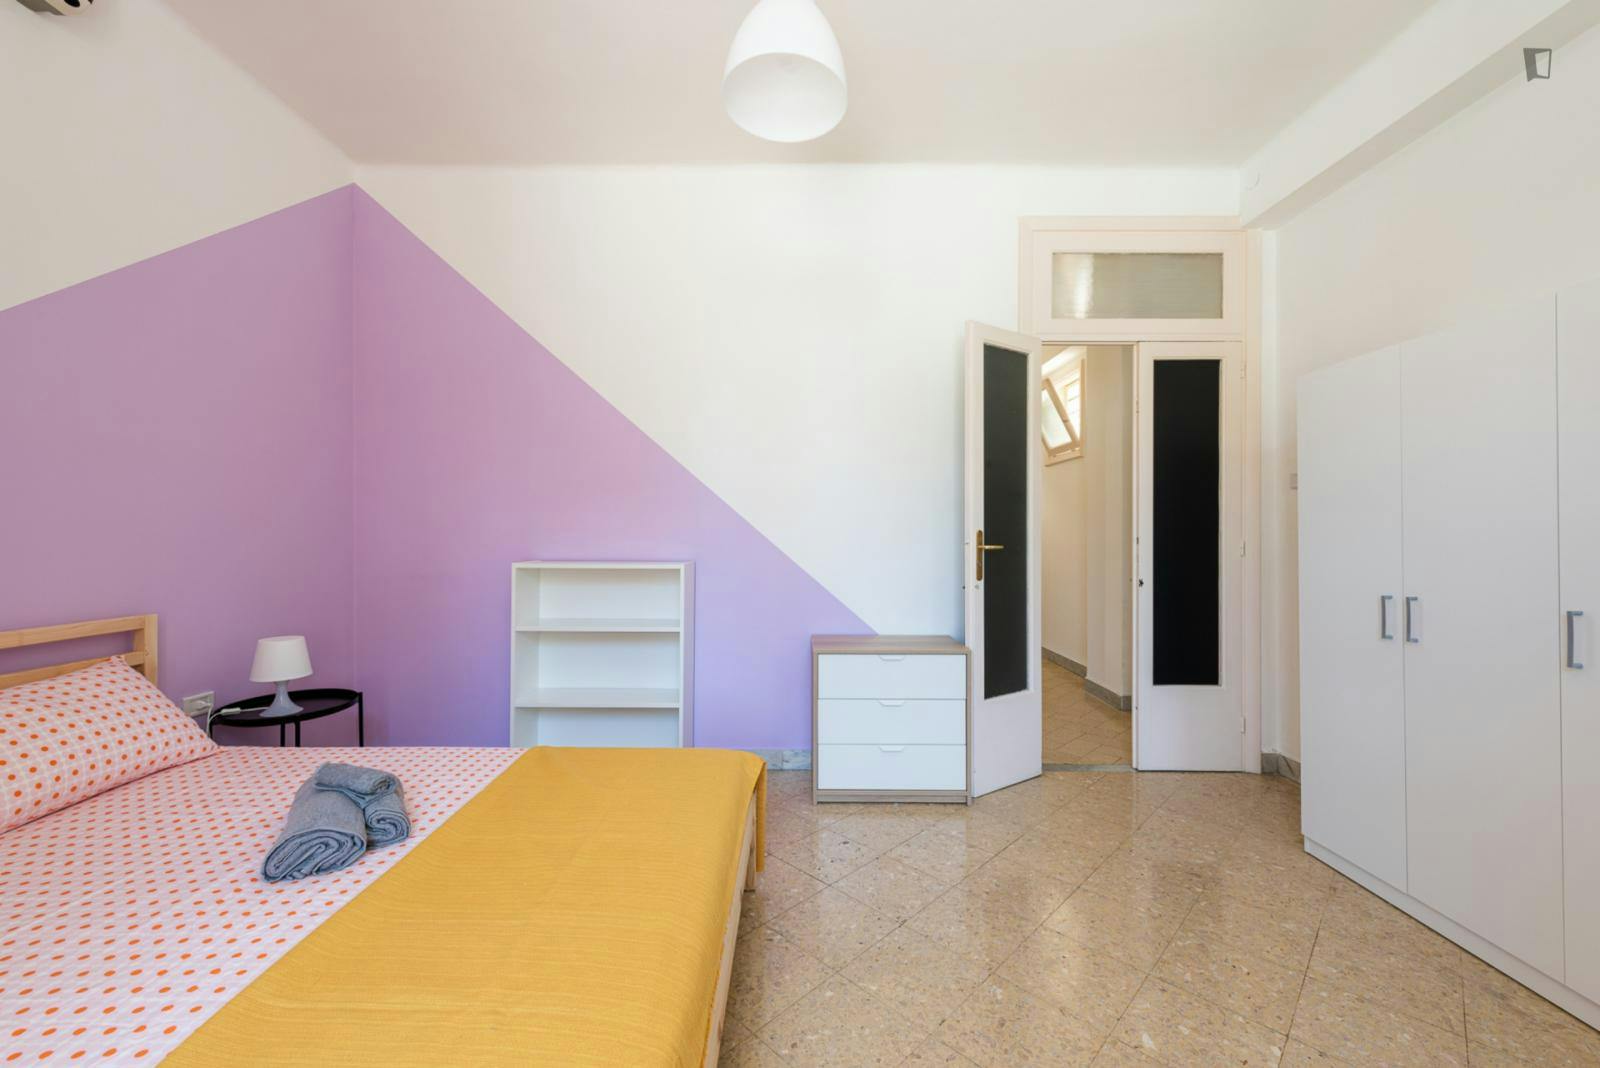 Homely double bedroom in a 4-bedroom apartment near Bari Sud Est train station